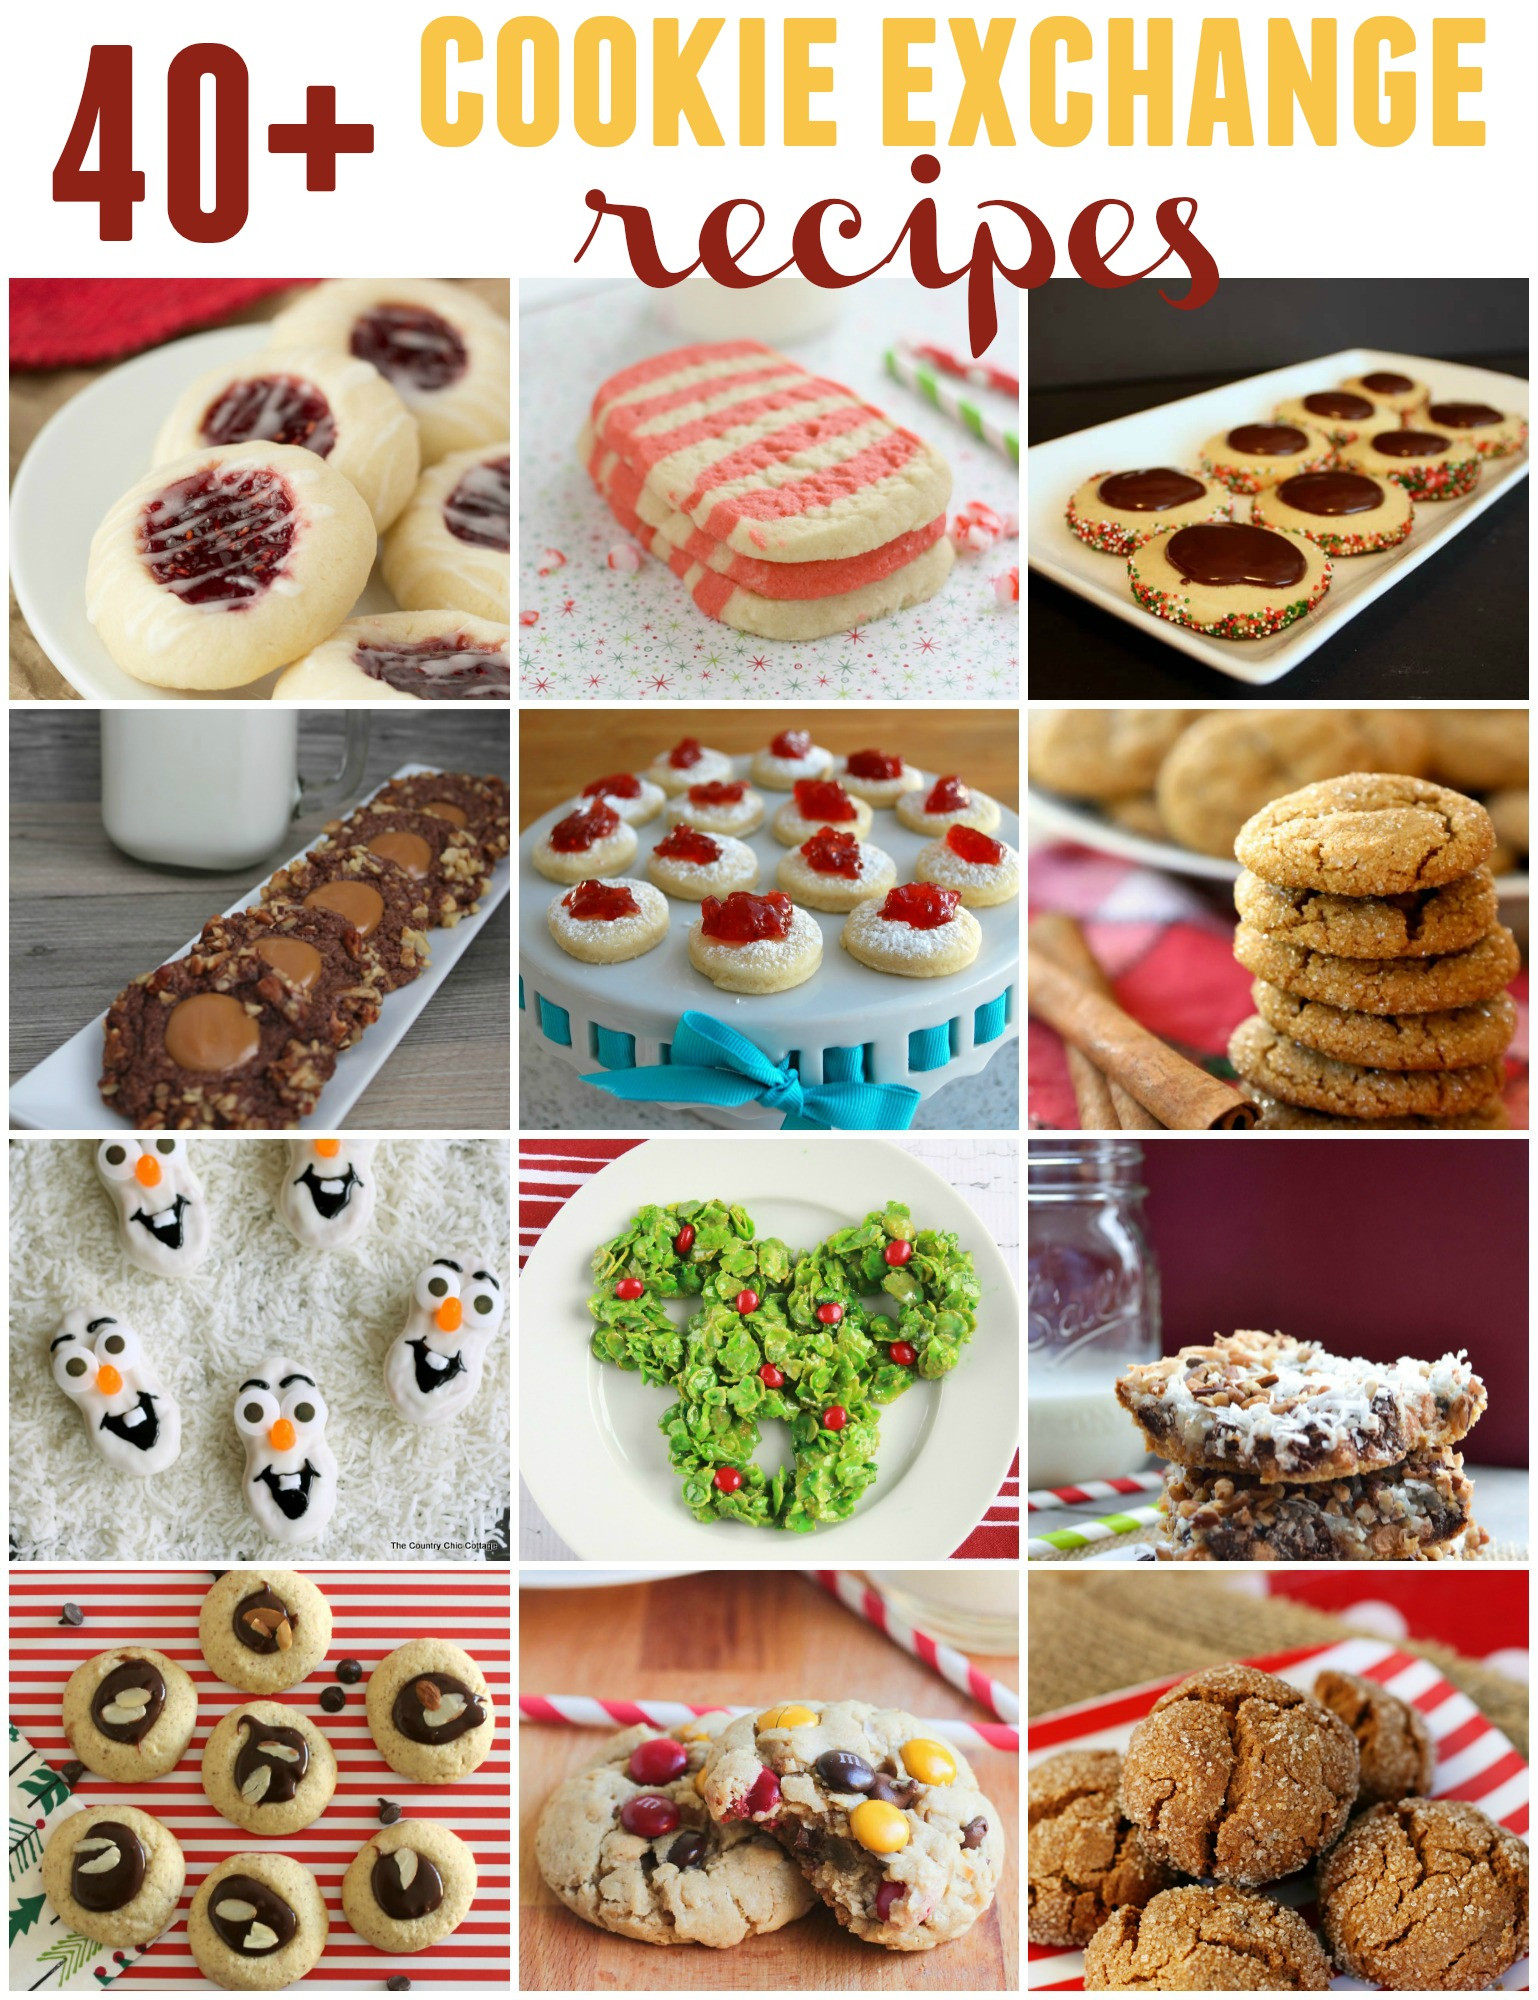 Easy Christmas Cookies For Cookie Exchange
 40 Cookie Exchange Recipes and Christmas Thumbprint